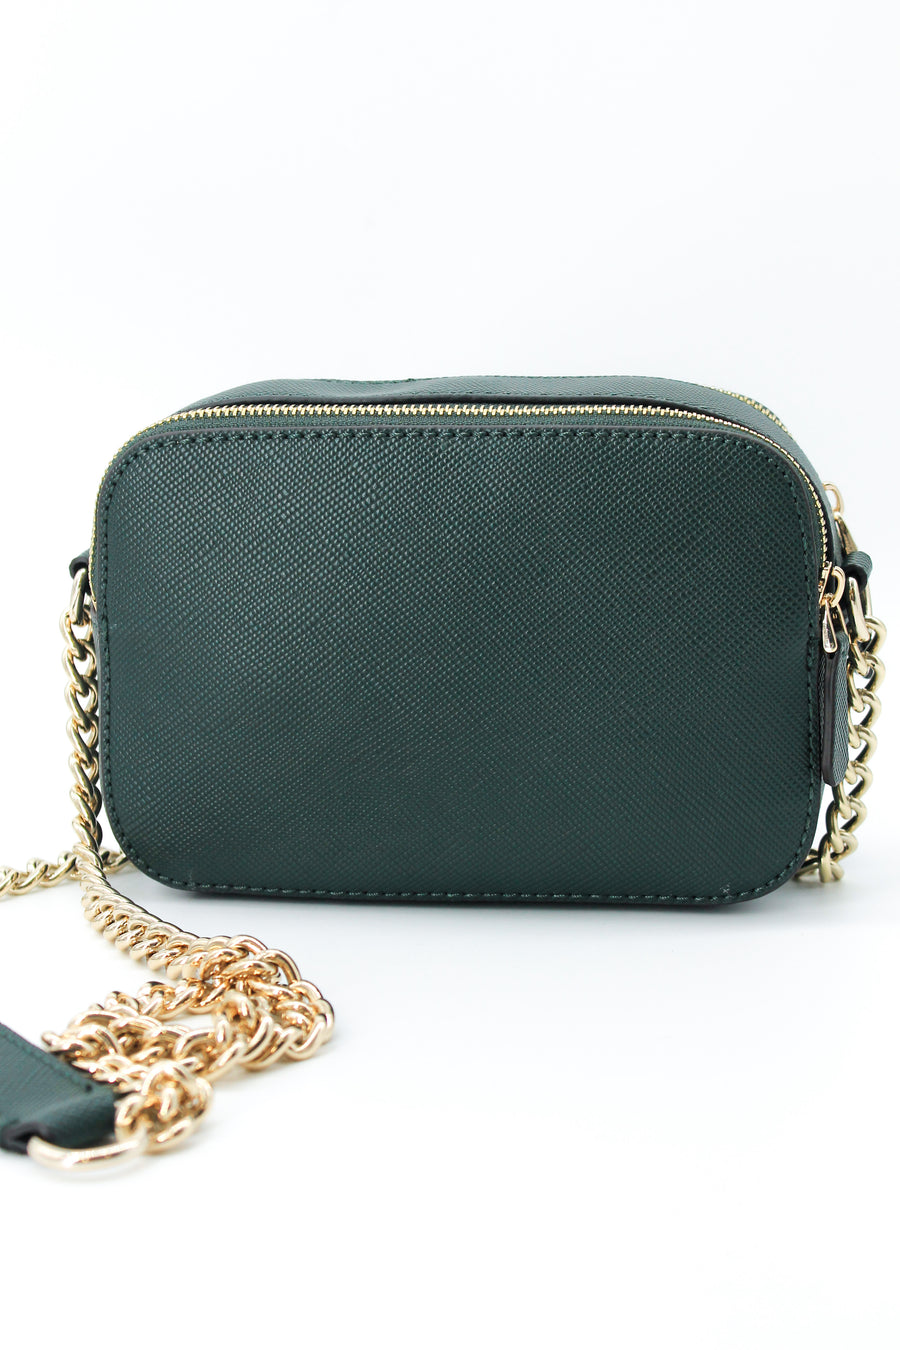 Guess ZG787914 Forest Green AW23